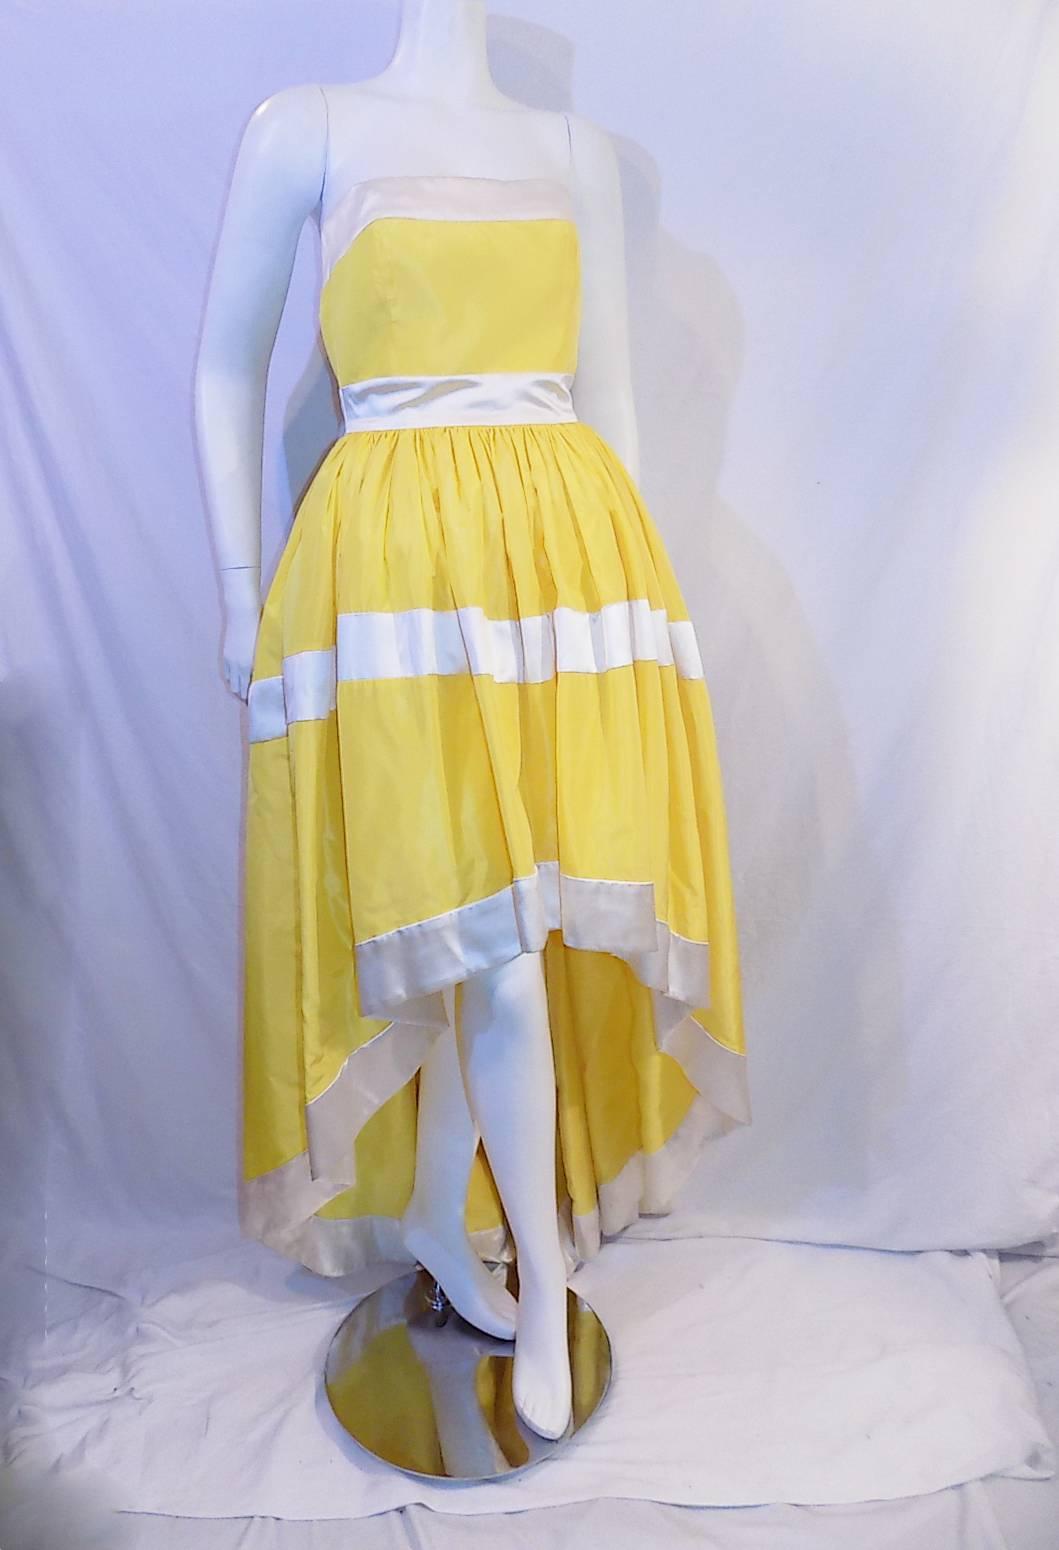 Pristine condition without any signs of wear! Yellow silk taffeta with wide white satin trim. High /low skirt style . Corset bodice. Dress features 3 bows at the back that could be removed if you like. Size  states 38 but   it is size 6 US.